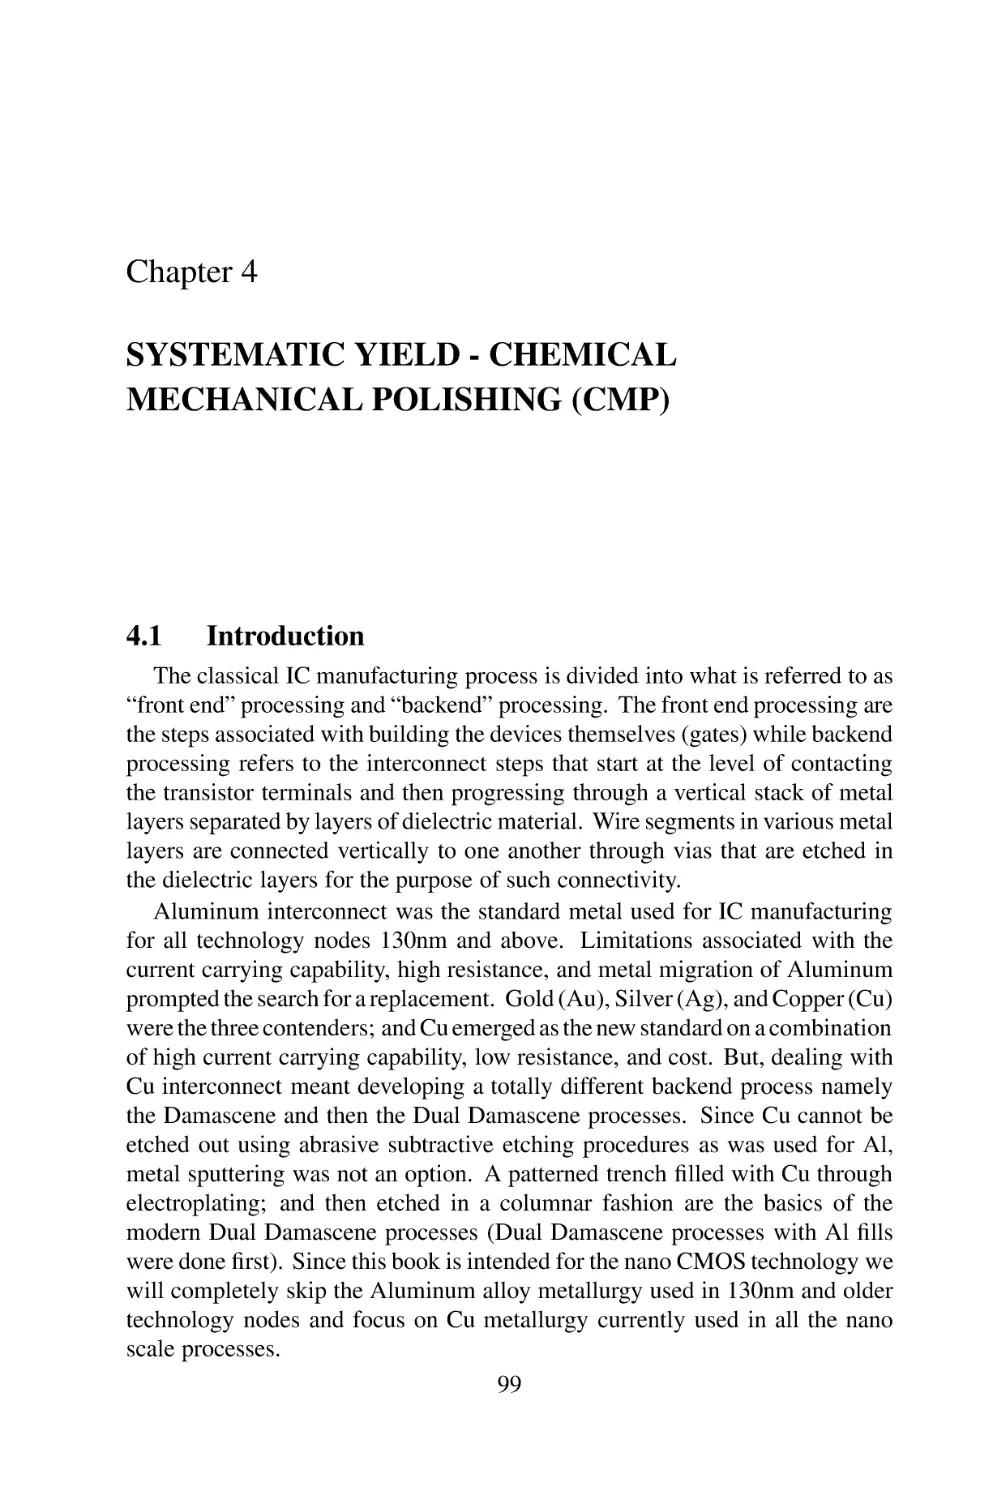 Chapter 4  SYSTEMATIC YIELD - CHEMICAL MECHANICAL POLISHING (CMP)